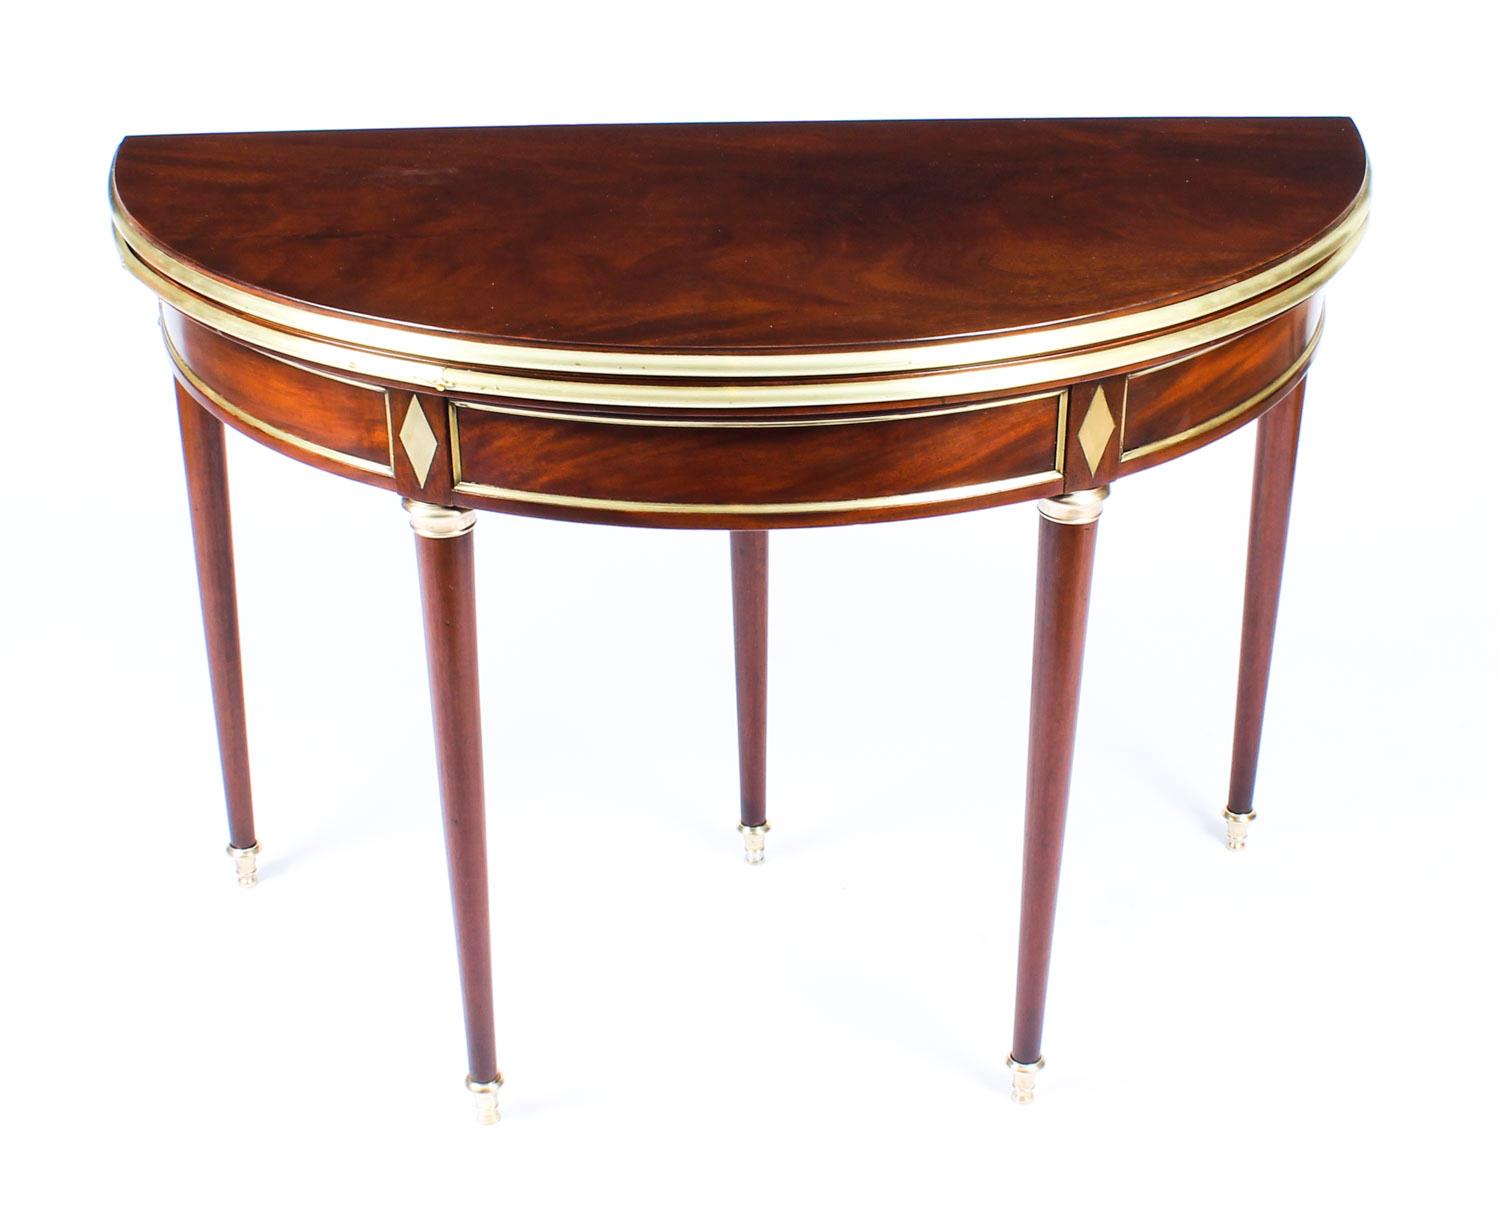 This is a very attractive antique French Directoire flame mahogany and brass mounted demi-lune ganes table, circa 1820 in date.

The folding top opening to reveal a baize lined playing surface, the central rear leg extending with a concealed drawer